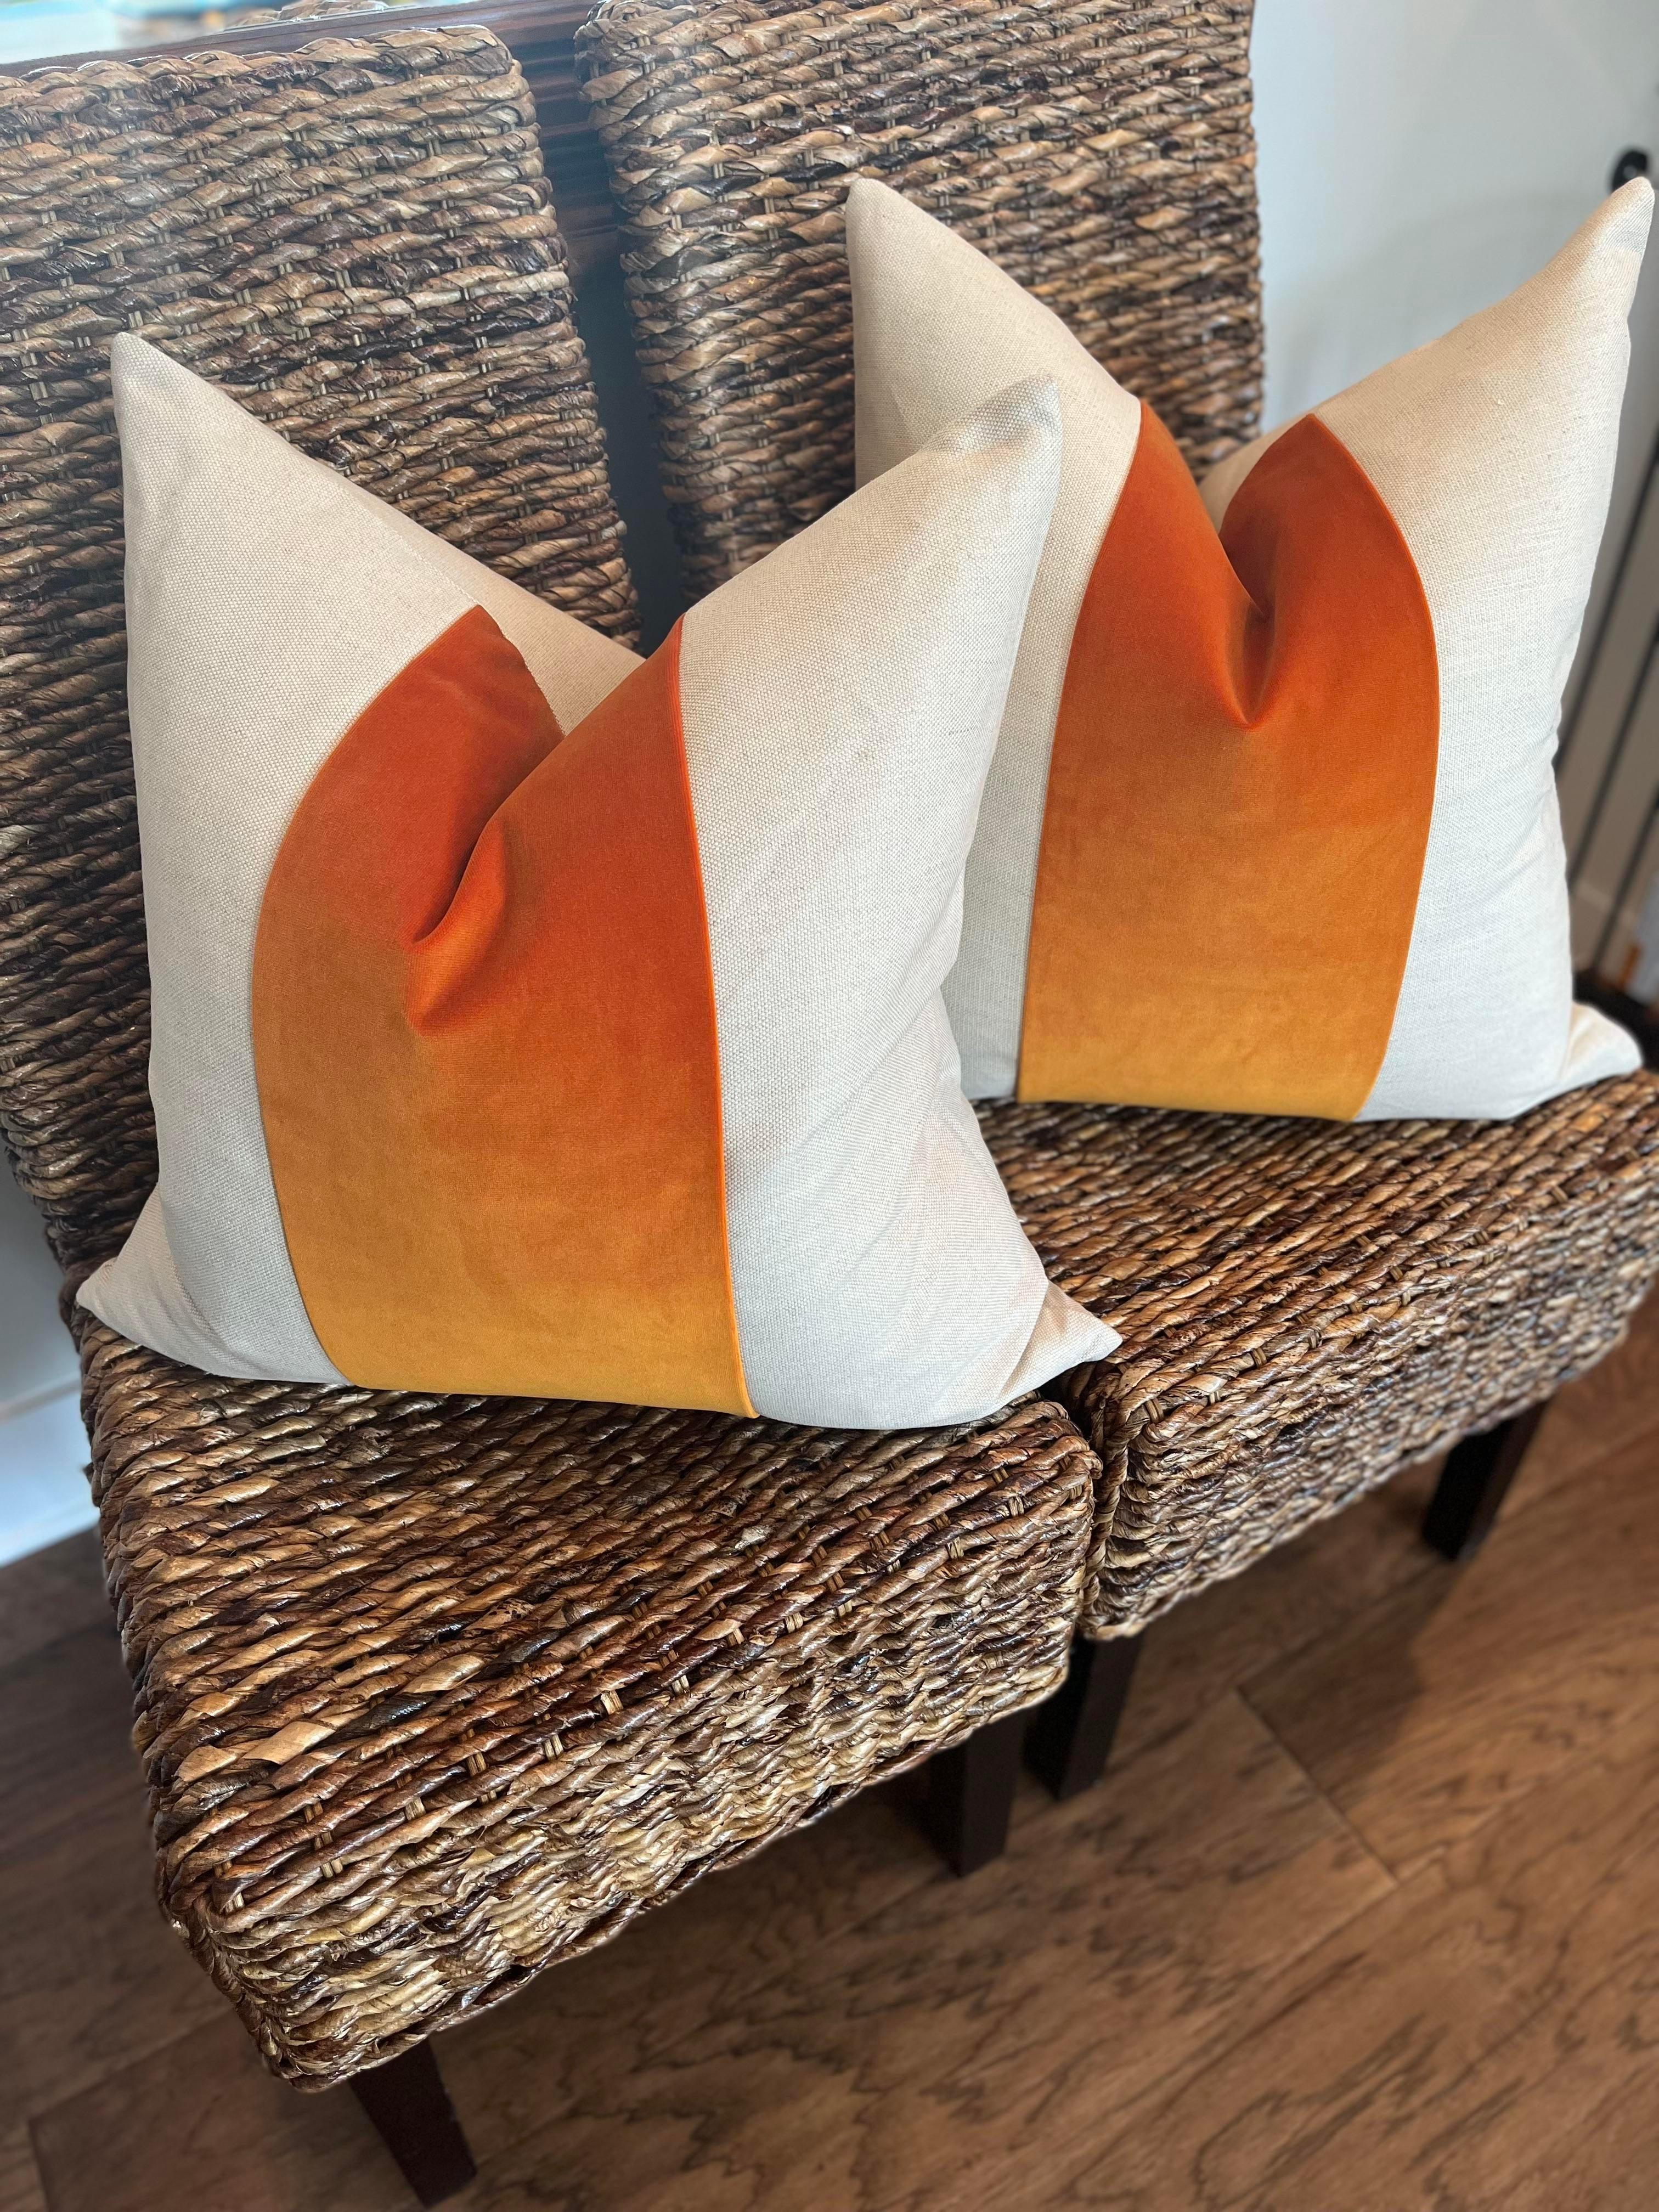 So sophisticated and stunning. My workroom wizards have taken lovely woven linen in an oatmeal tone and added a wonderfully popcicle orange velvet stripe down the center. The backing is the same supple oatmeal linen and closure is by way of